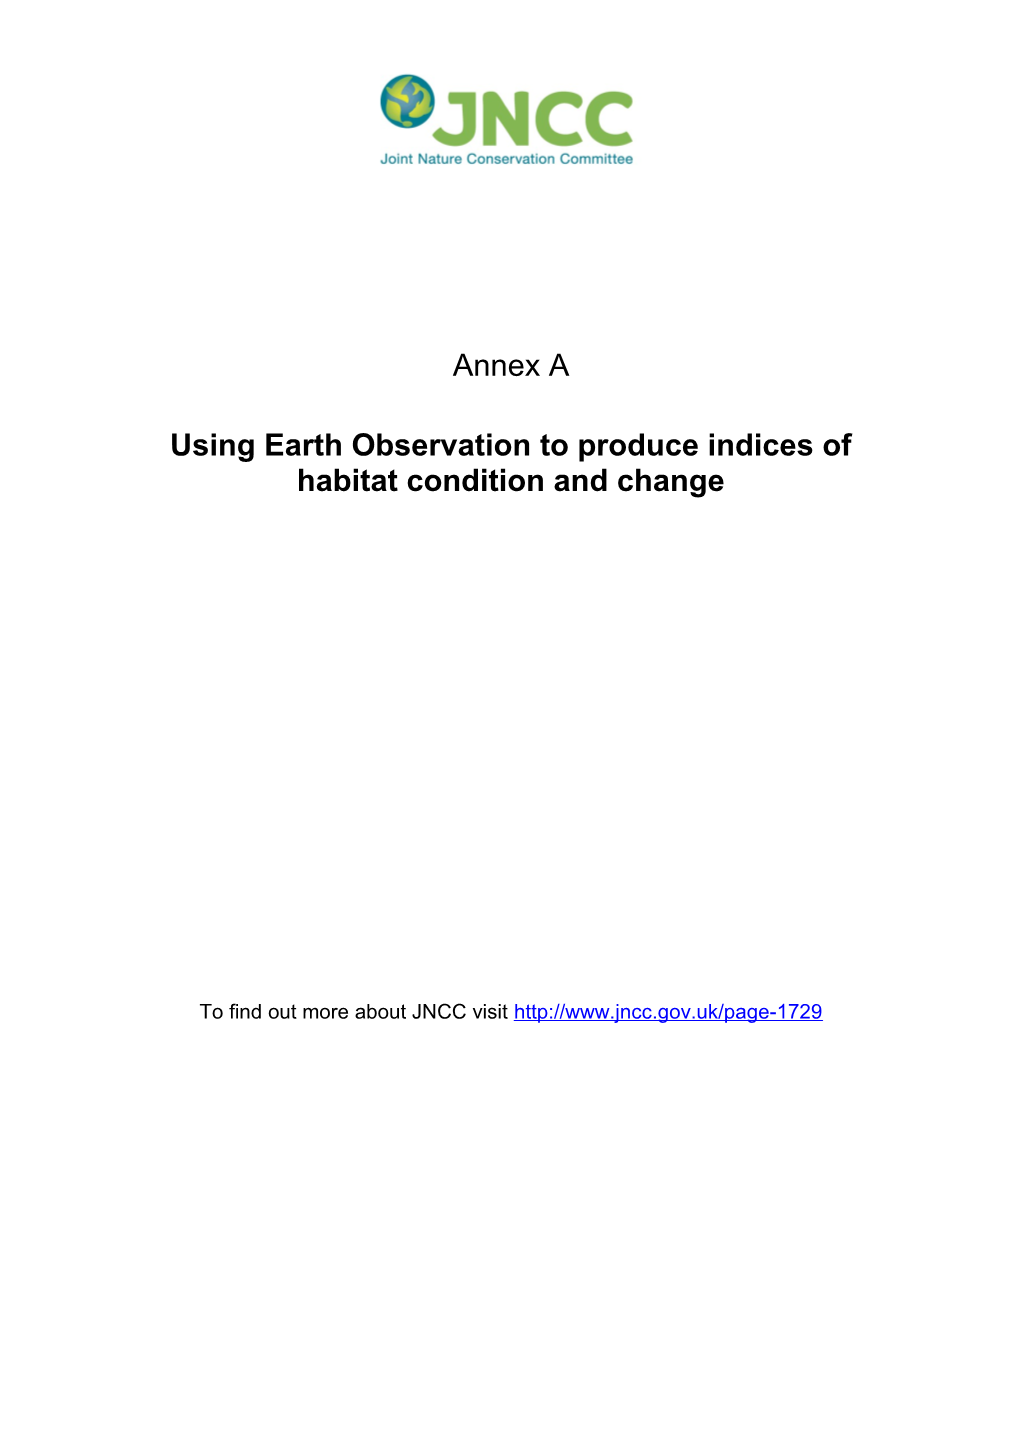 Using Earth Observation to Produce Indices of Habitat Condition and Change